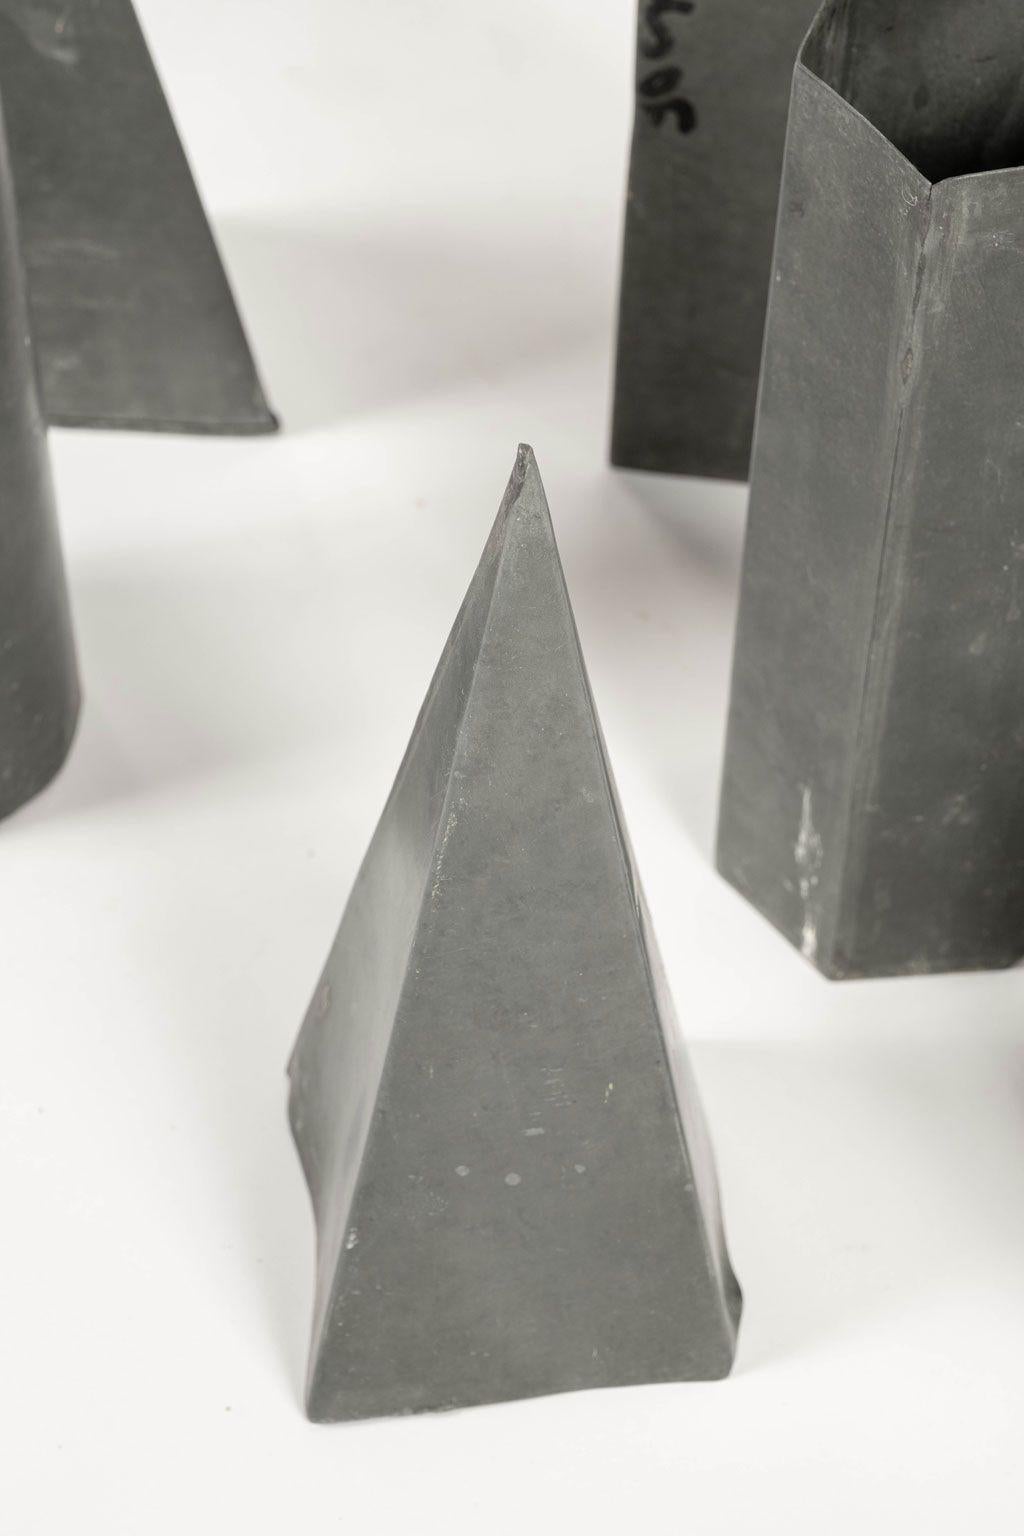 Collection of vintage geometric forms in zinc. Circa 1950-1979, Paris. Six pieces total or varying shapes and sizes. Sold together as a set priced $2,600.

Measurements:
Cylinder: H 10 in x DM 4 in
Pyramid: H 9.75 in x W 4 in x D 4 in
Prism: H 12 in